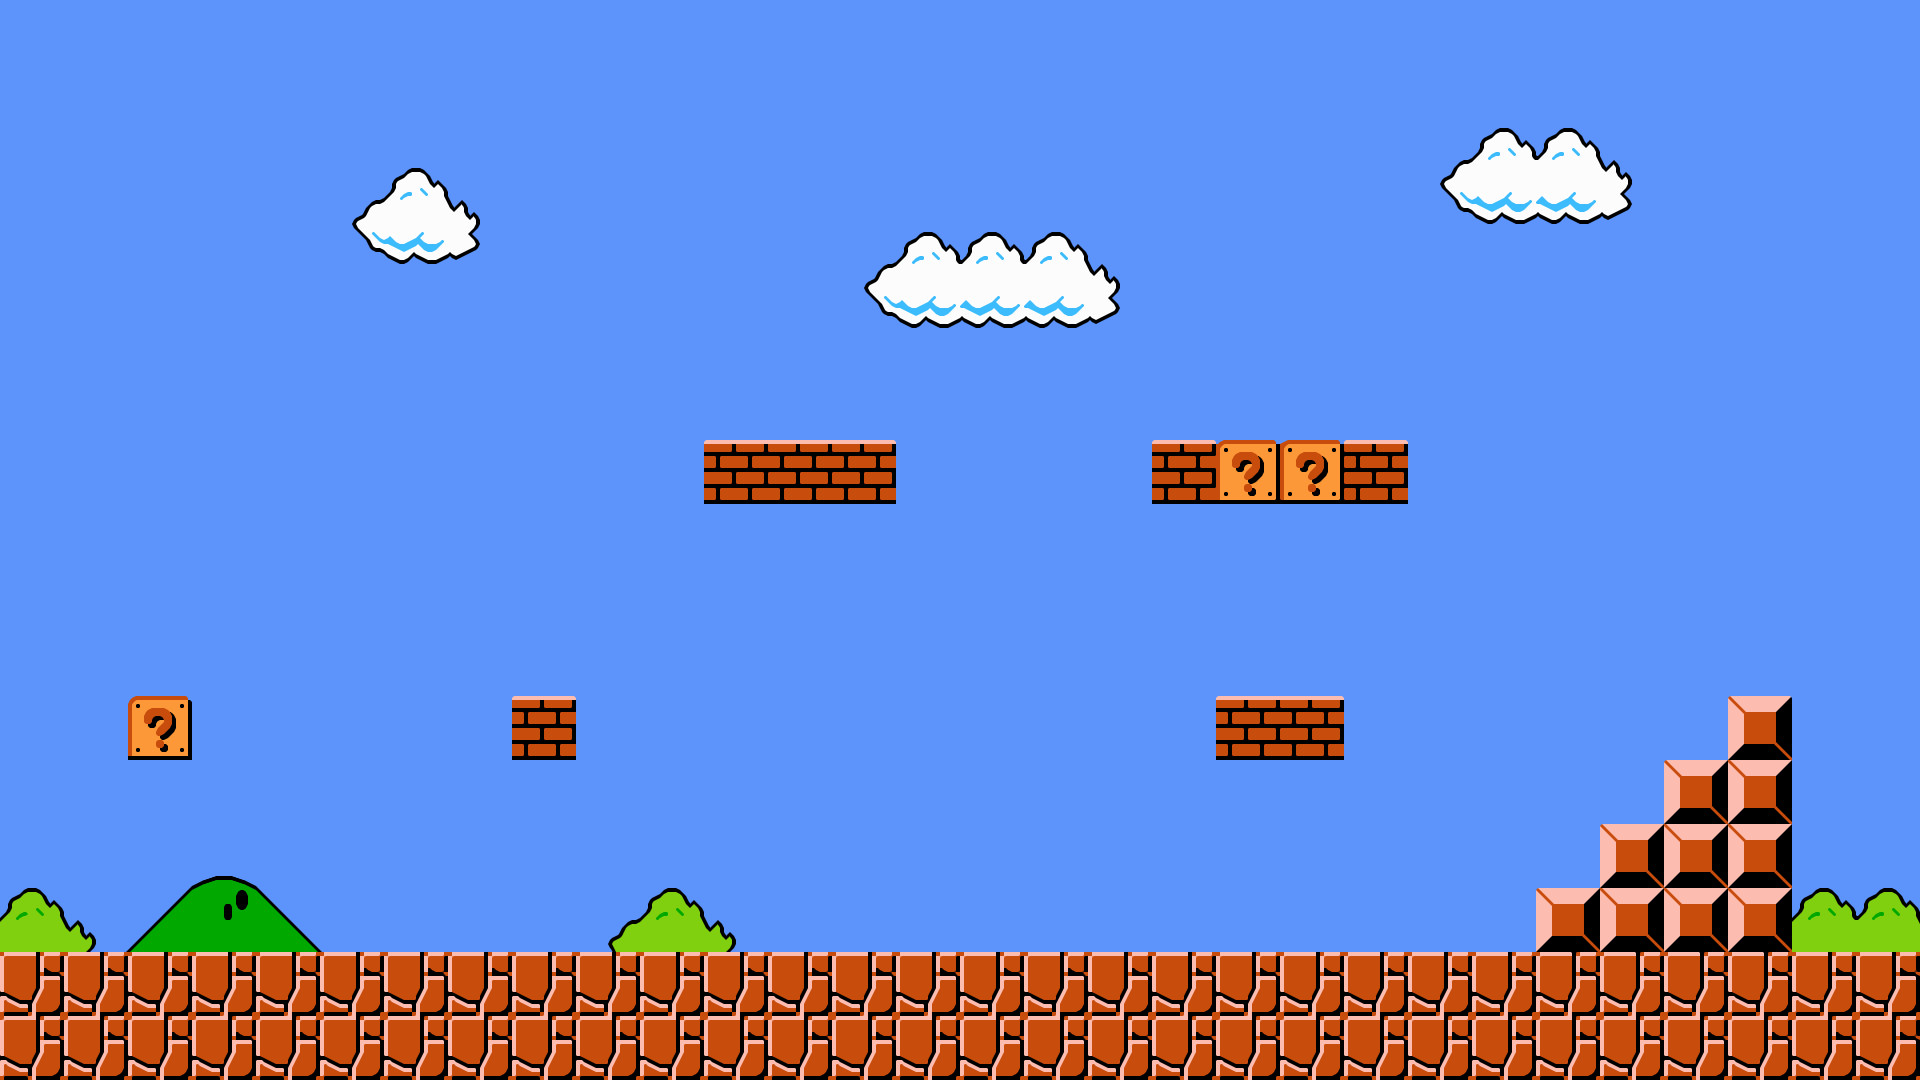 1920x1080 ... Super Mario Bros 1-1 Wallpaper HD Flat by wougie89